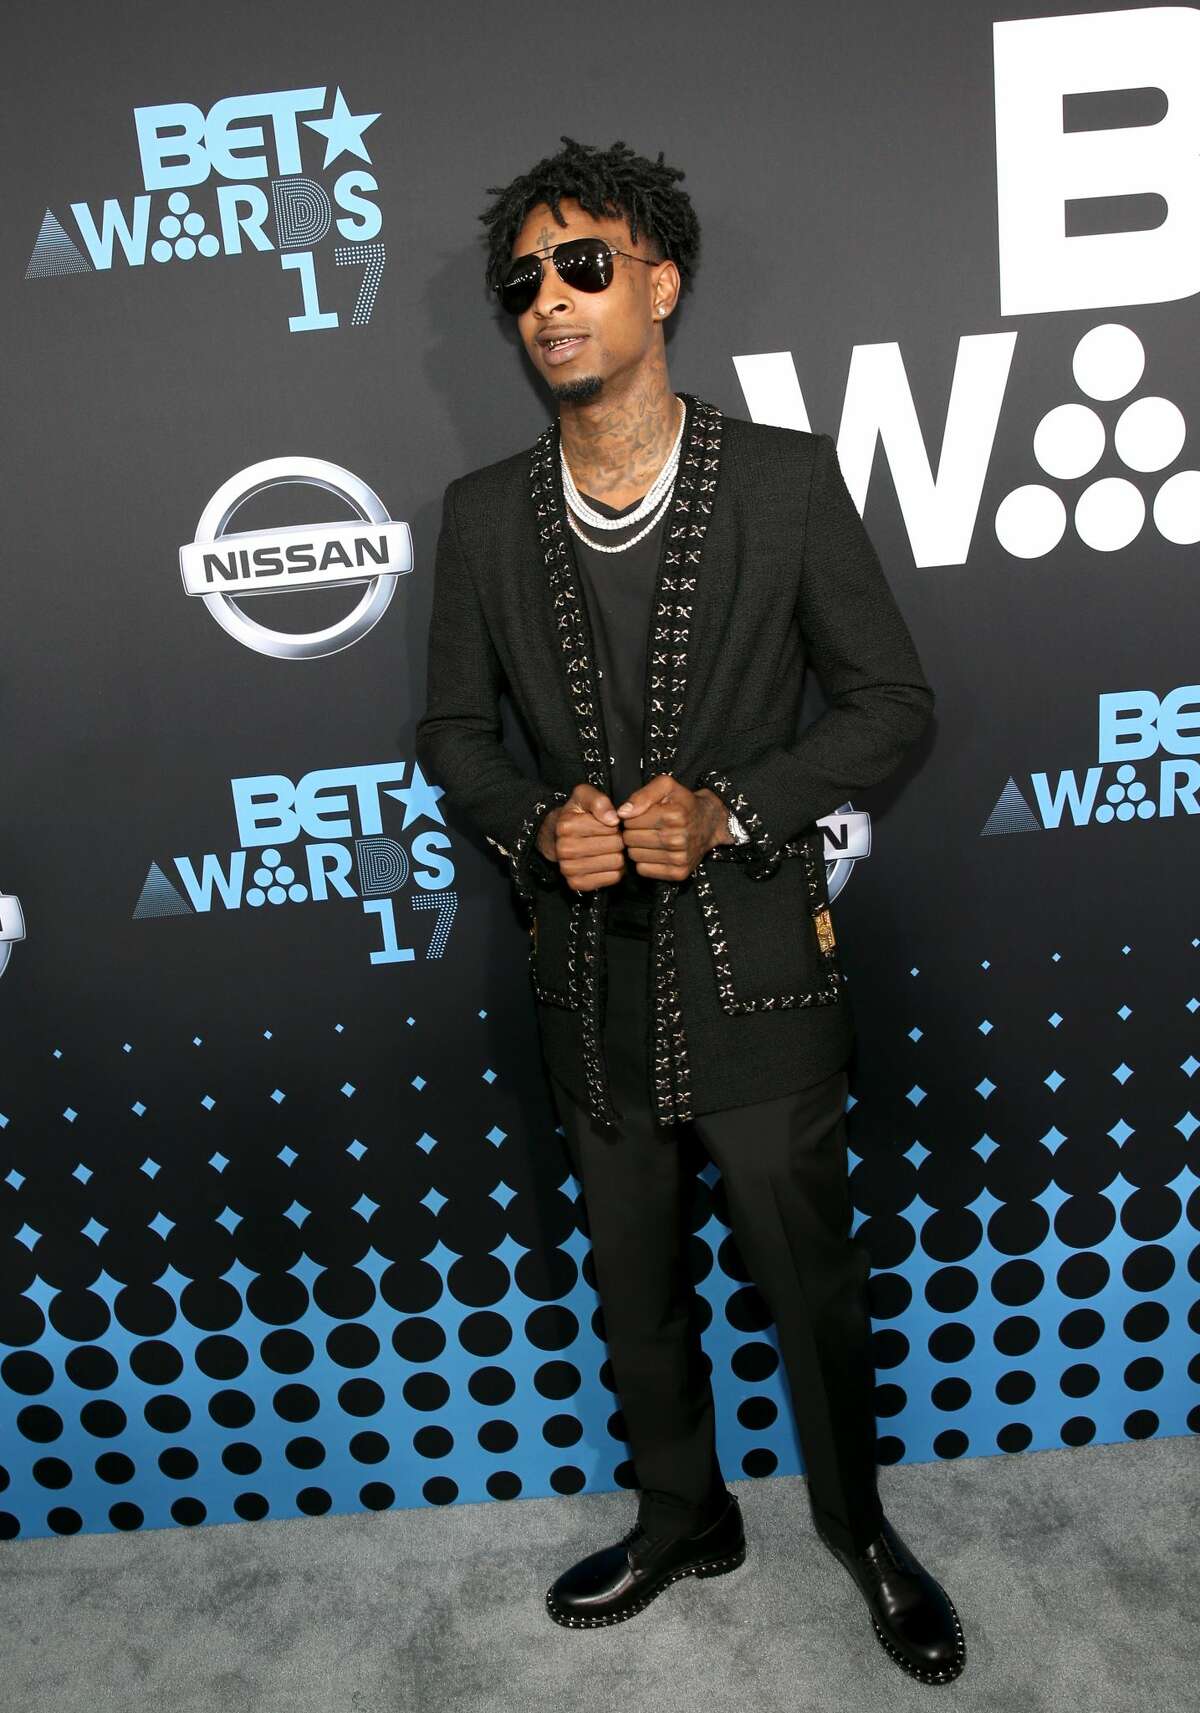 Rapper 21 Savage arrested by ICE, which alleges he is actually British